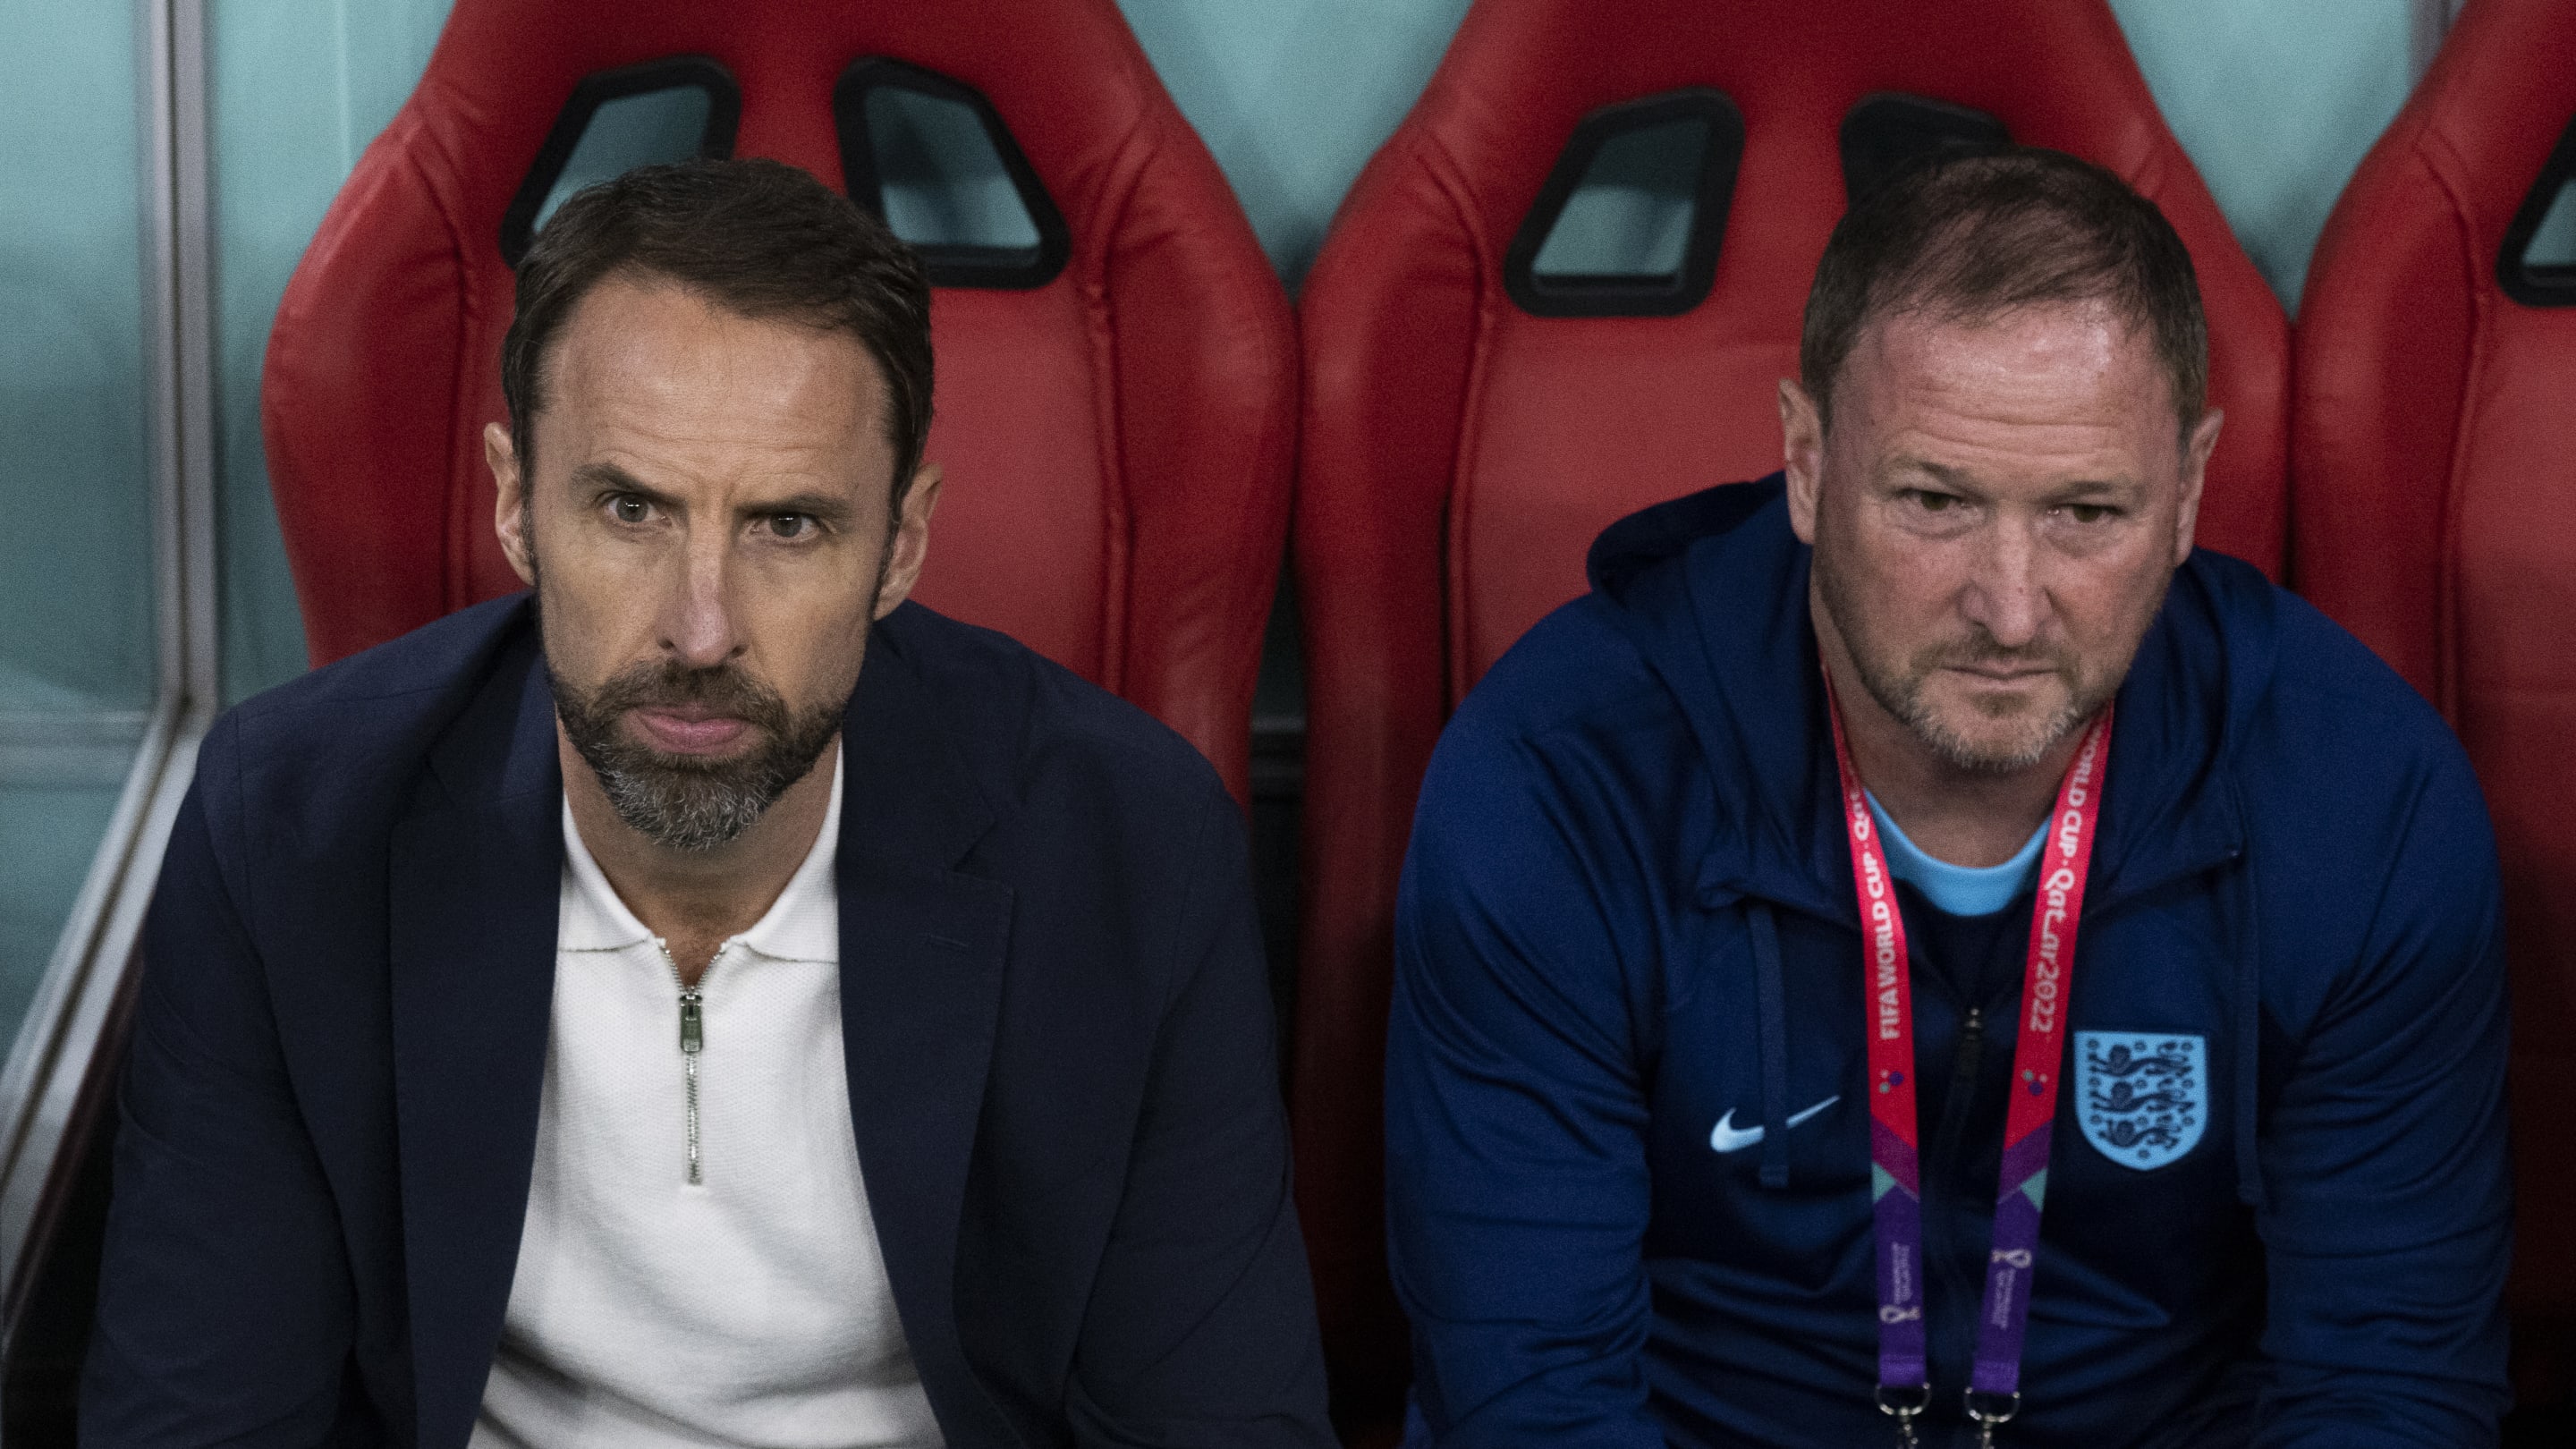 Gareth Southgate's risk-averse approach is bleeding into England performances